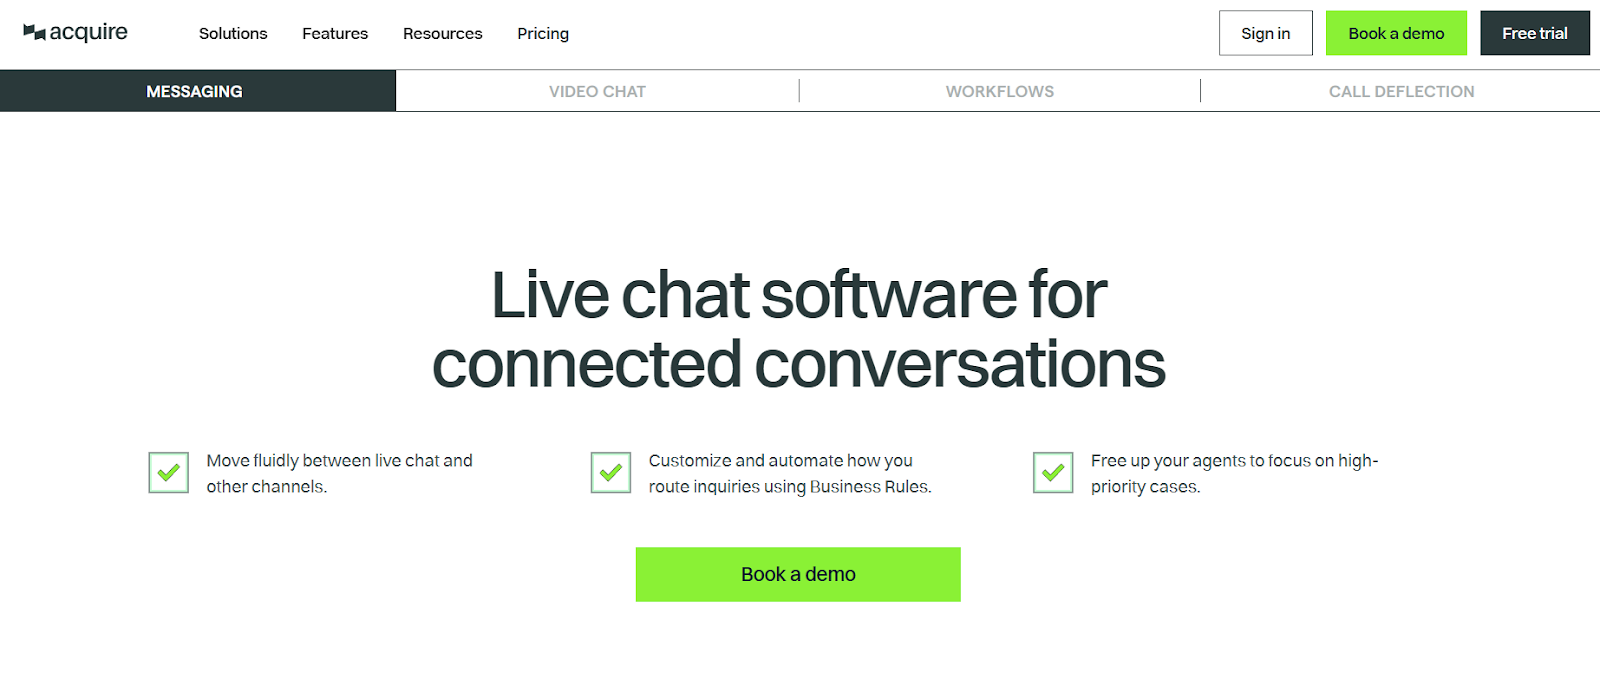 acquire live chat